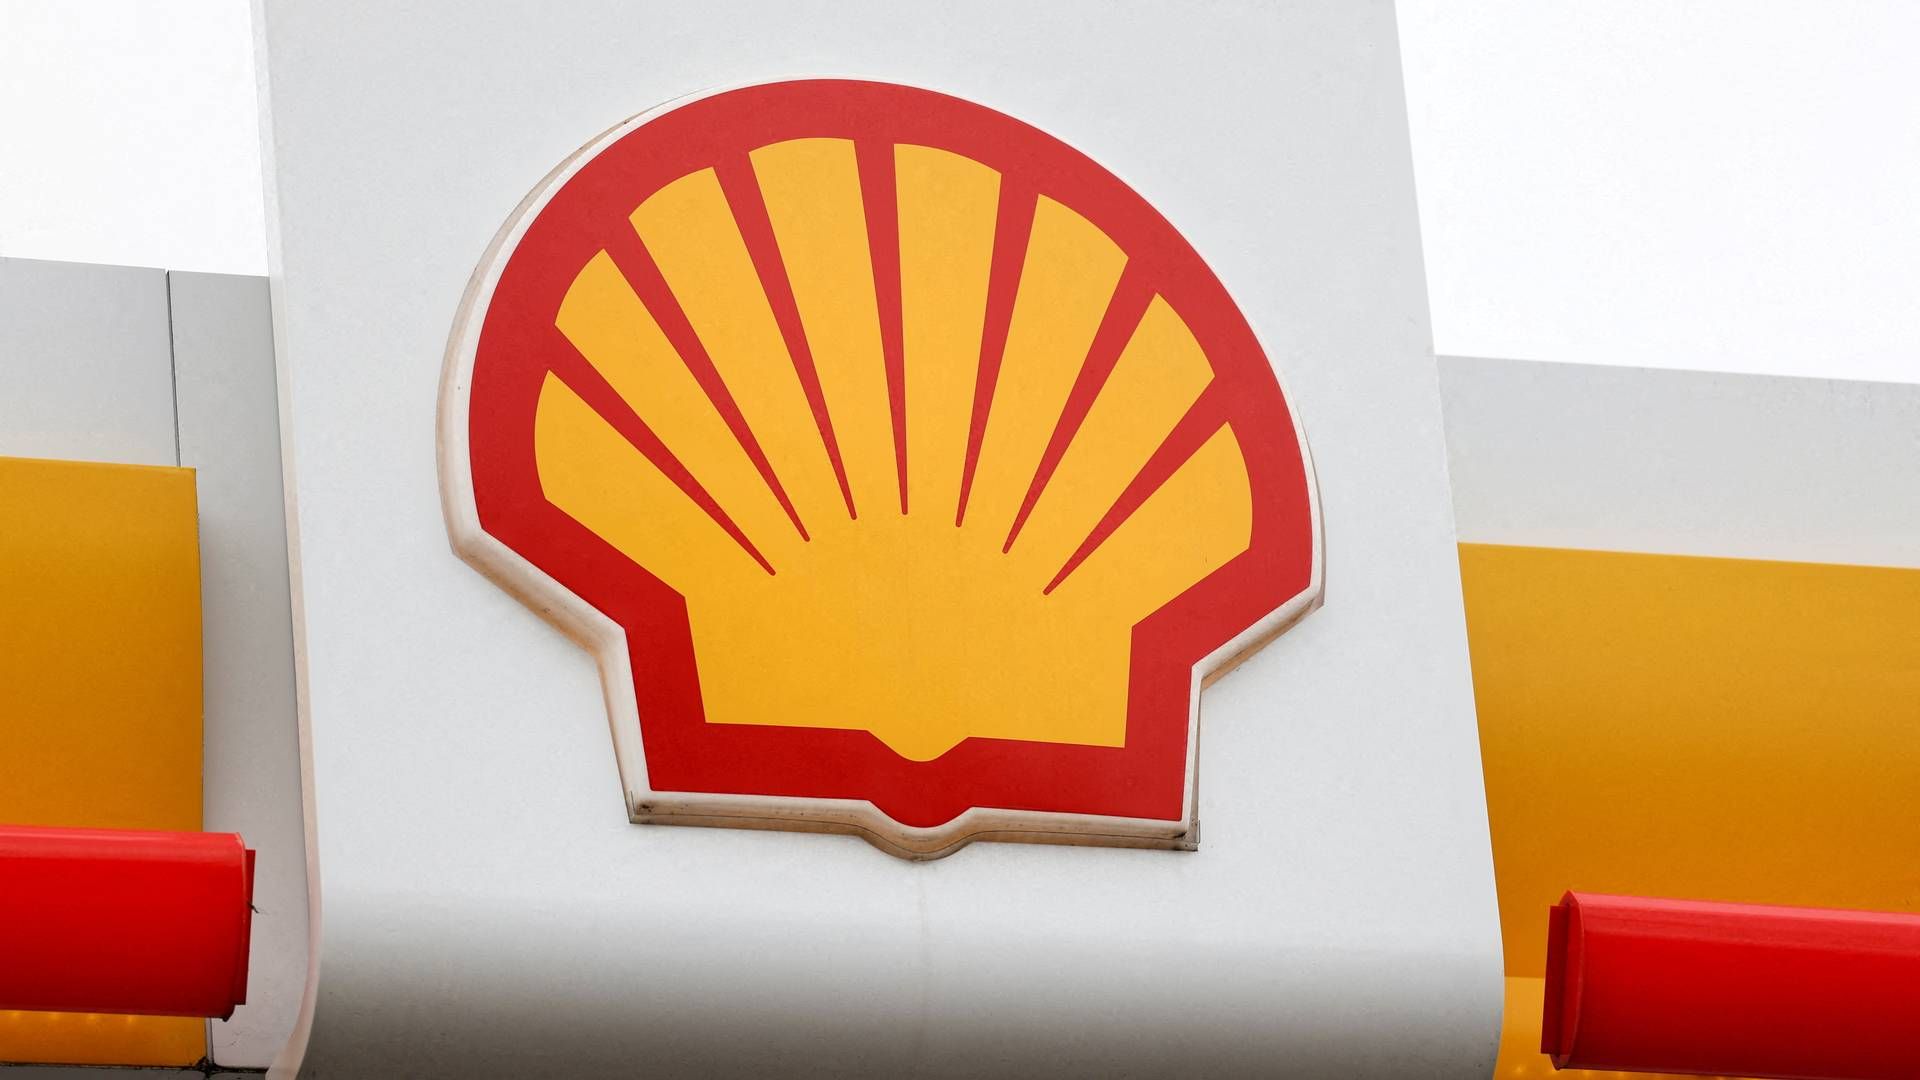 Shell will commence its annual general meeting today, Tuesday. | Photo: May James/Reuters/Ritzau Scanpix